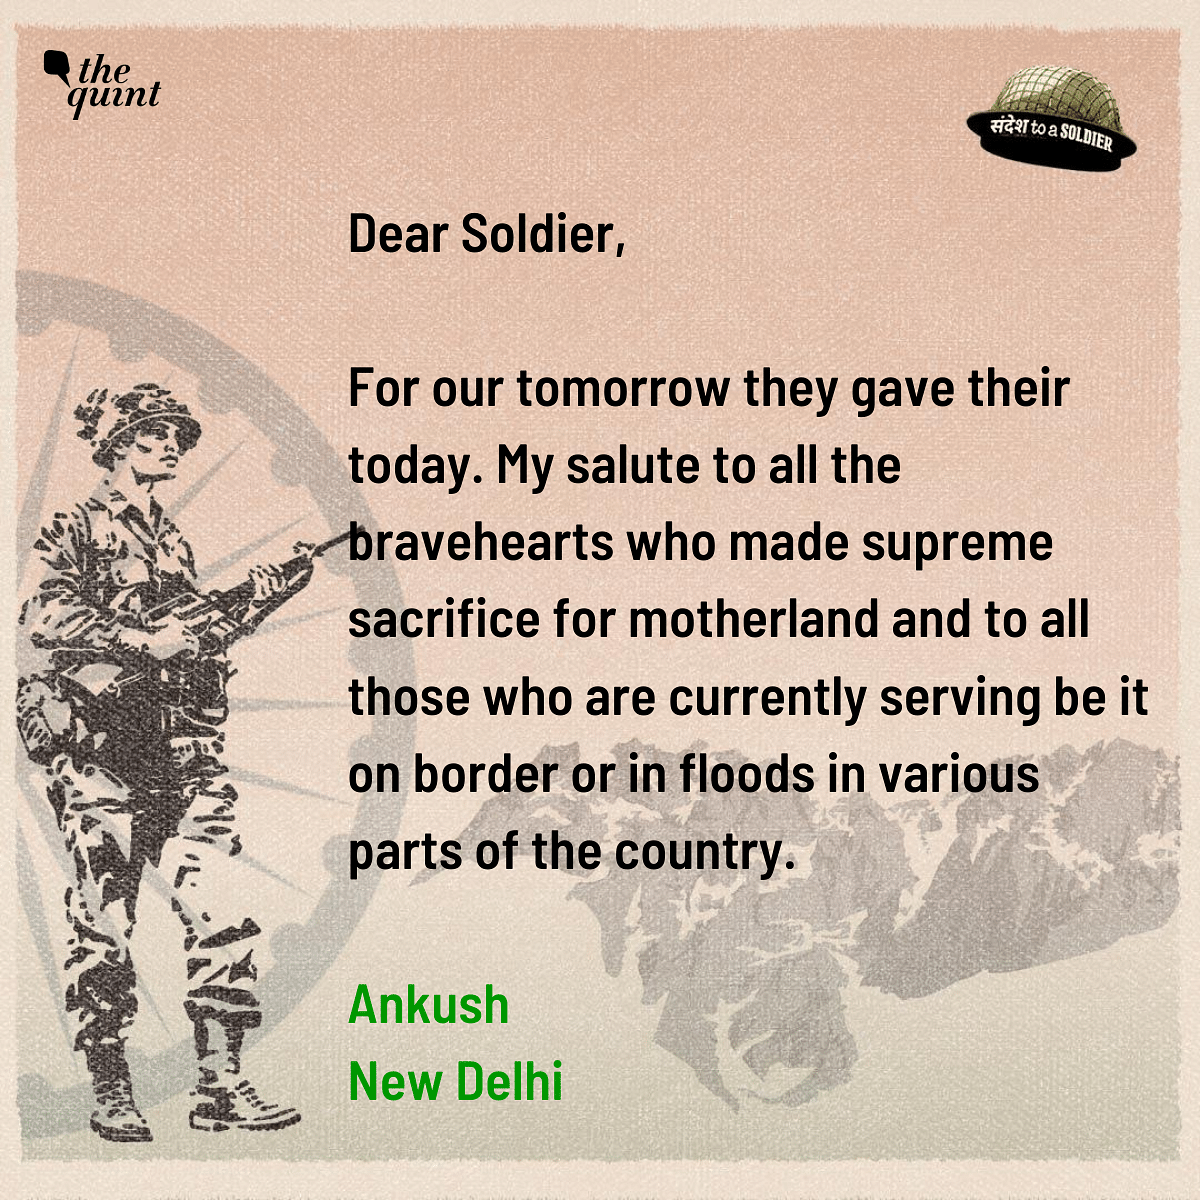 Souraja from West Bengal, pens down how for soldiers whom they have never met, she prays to God to protect them.